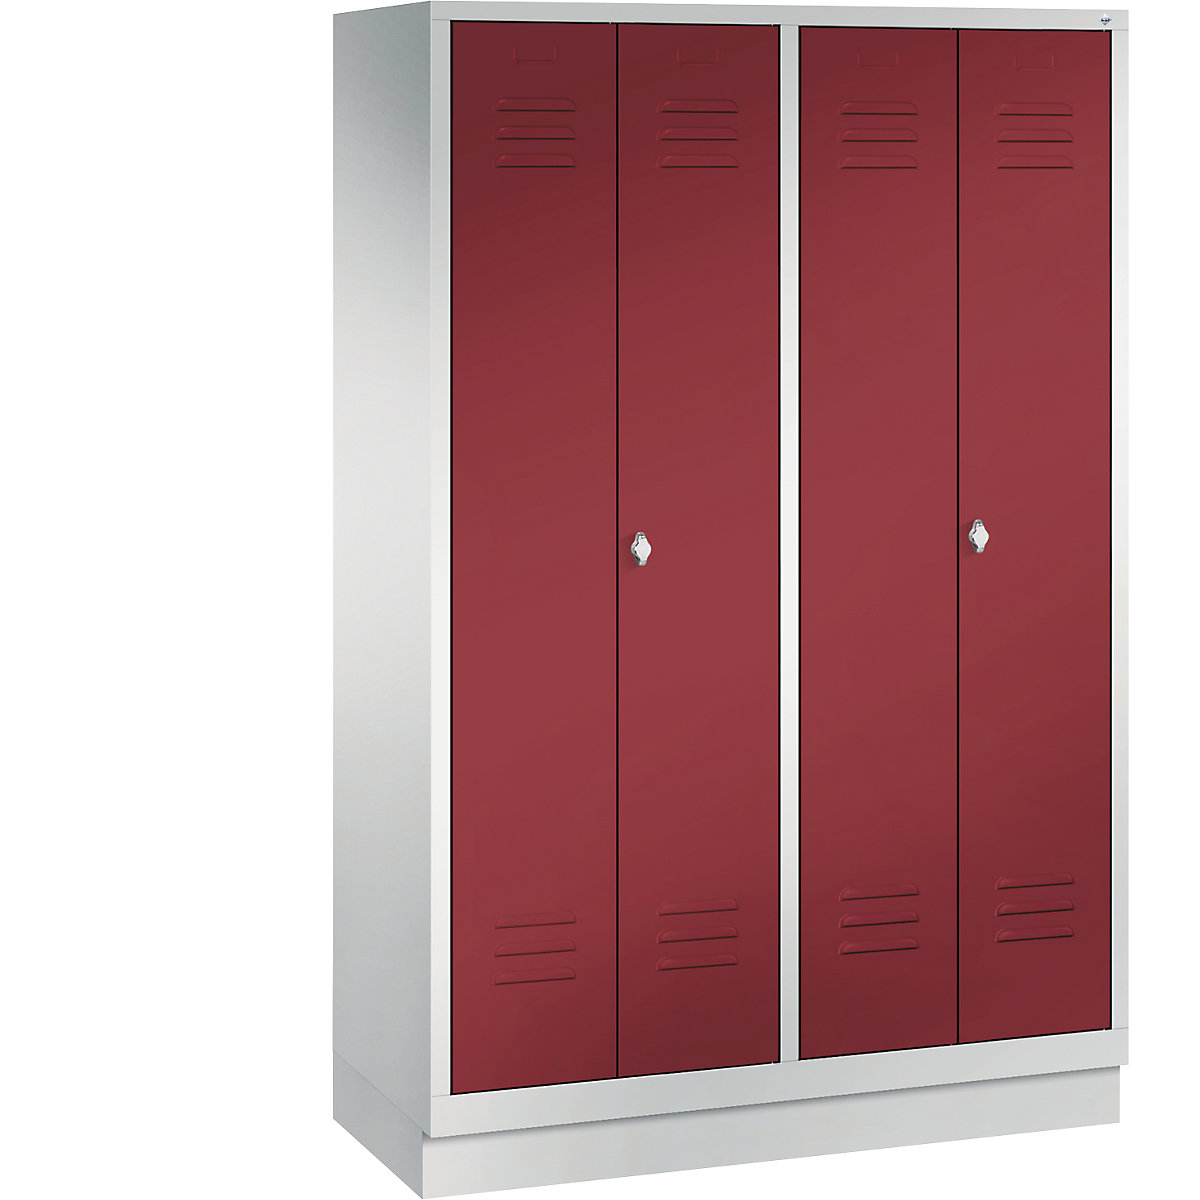 CLASSIC cloakroom locker with plinth, doors close in the middle – C+P, 4 compartments, compartment width 300 mm, light grey / ruby red-13